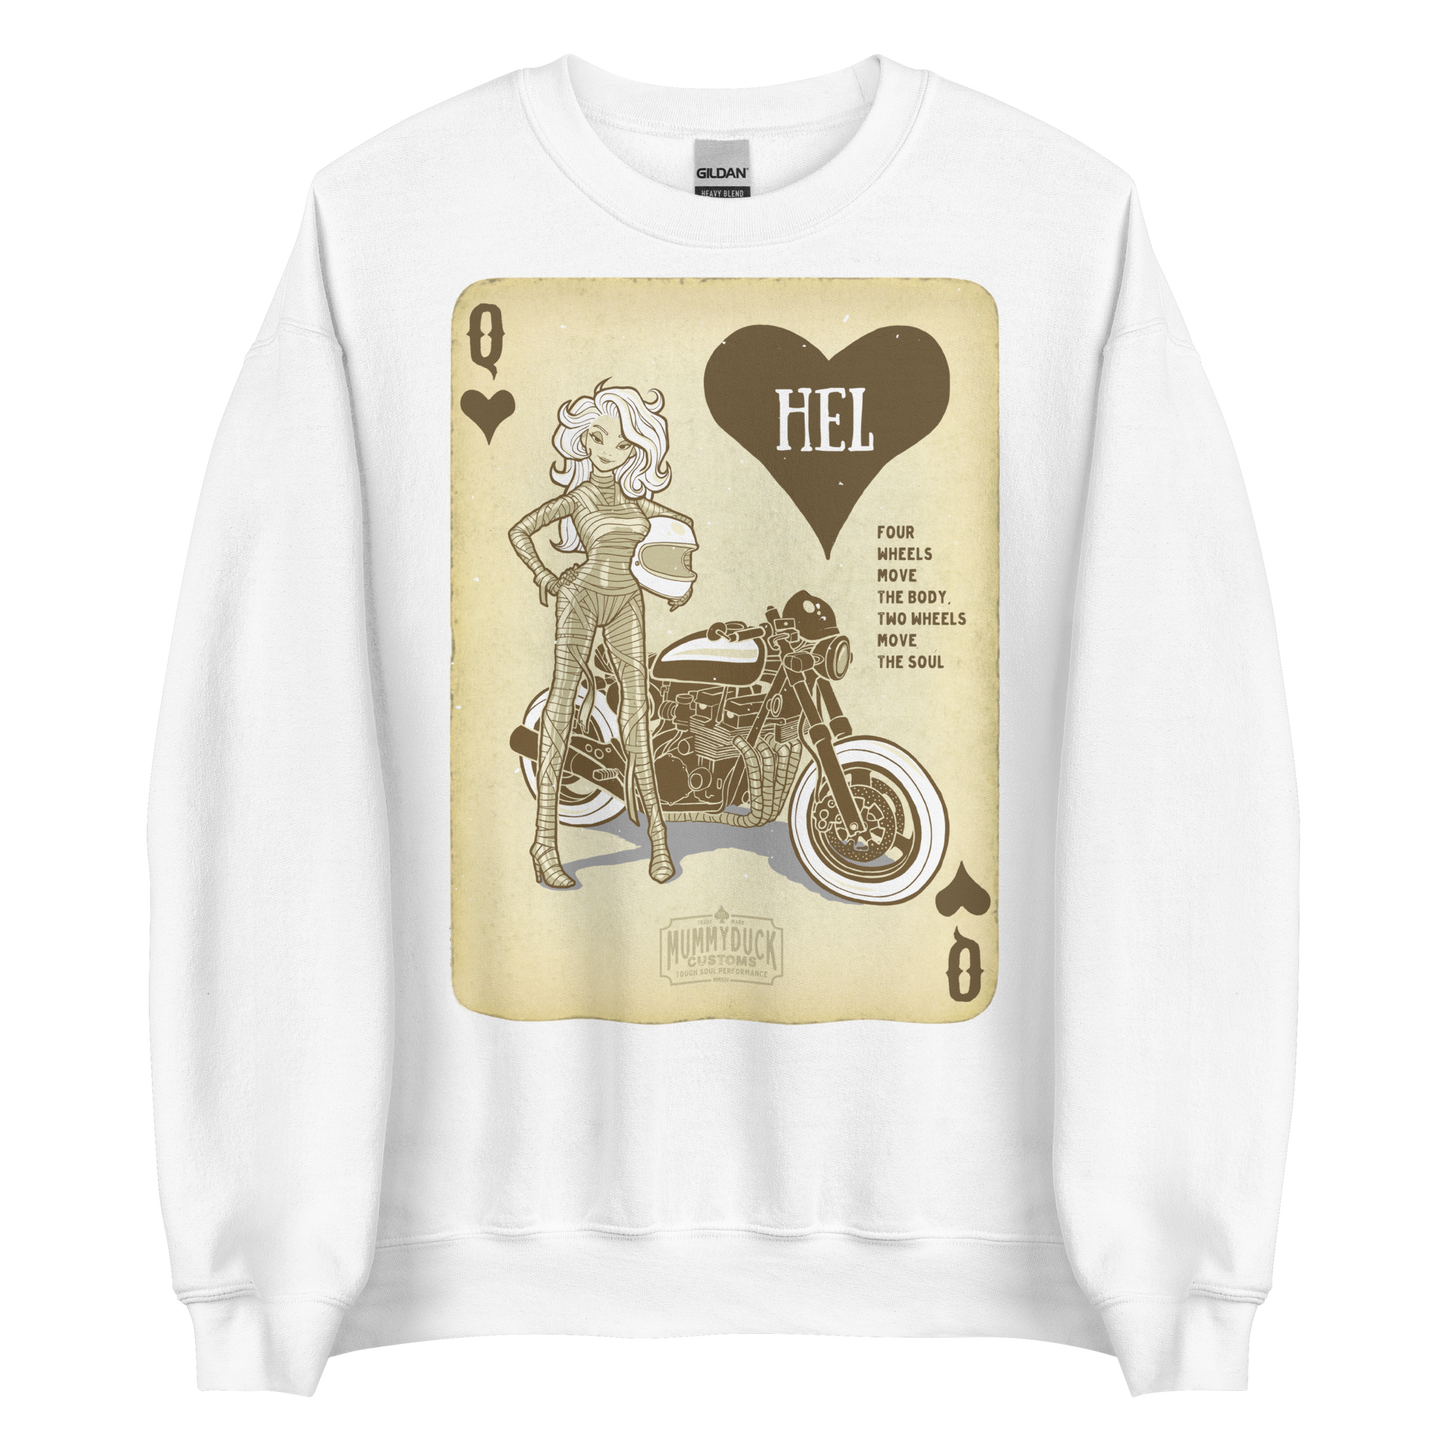 HEL Queen Motorcycle Sweatshirt bound to keep you warm in the colder months. A pre-shrunk, classic fit sweater that's made with air-jet spun yarn for a soft feel and reduced pilling.